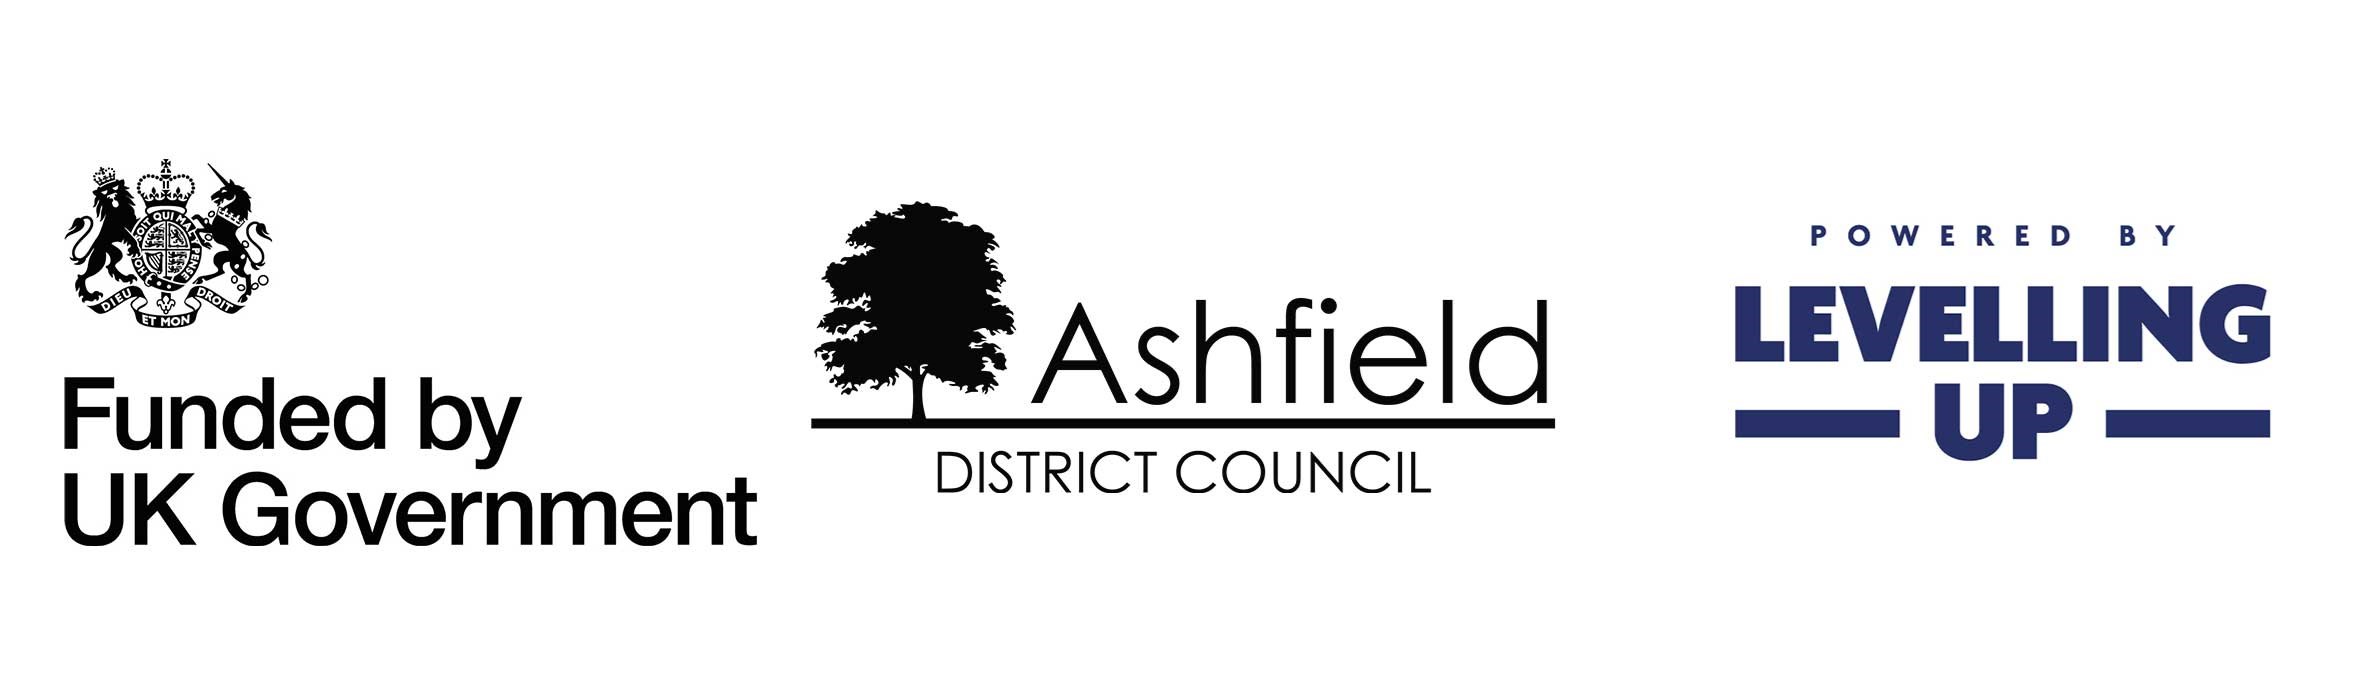 Funded by UK Government logo, Ashfield District Council logo, Powered by Levelling up logo